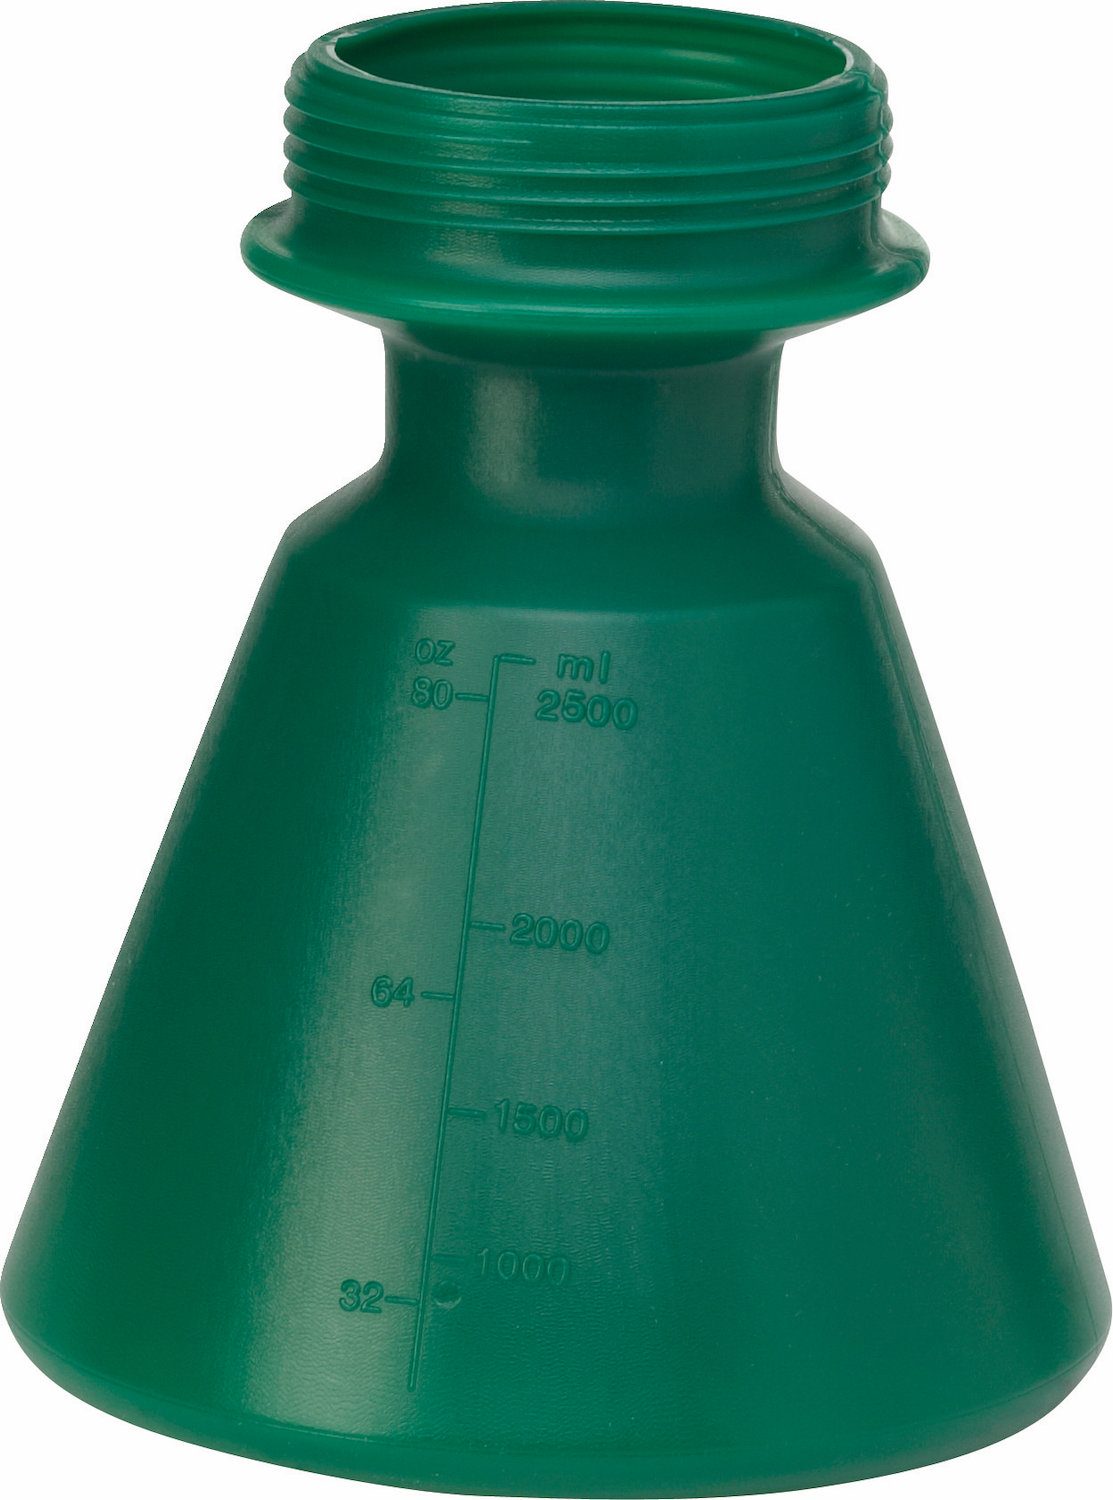 Spare container, 240 mm, , Green